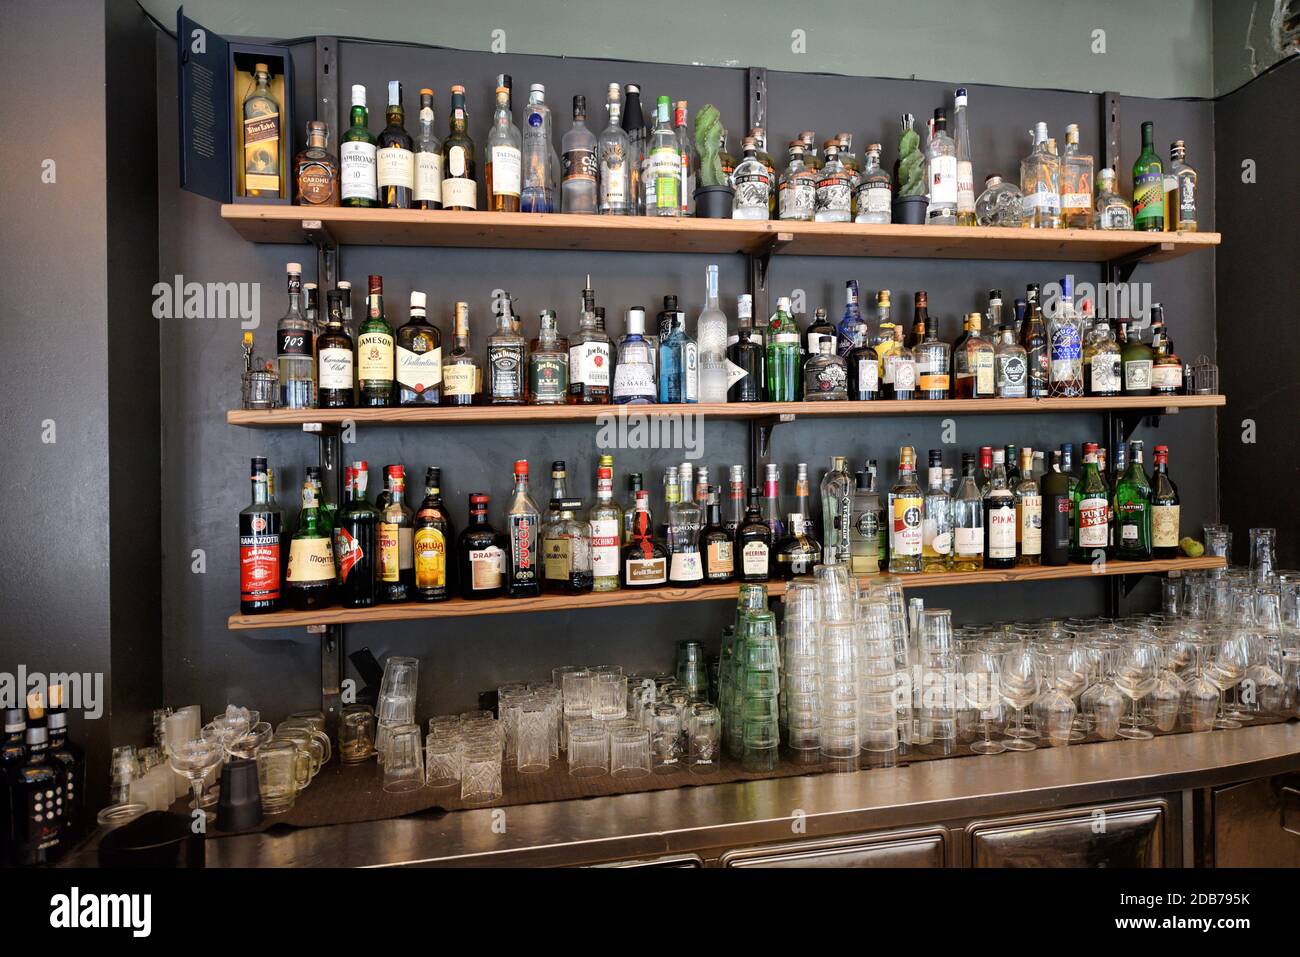 Large assortment of alcoholic beverages in bottles displayed on shelves in a cafe or bar Stock Photo